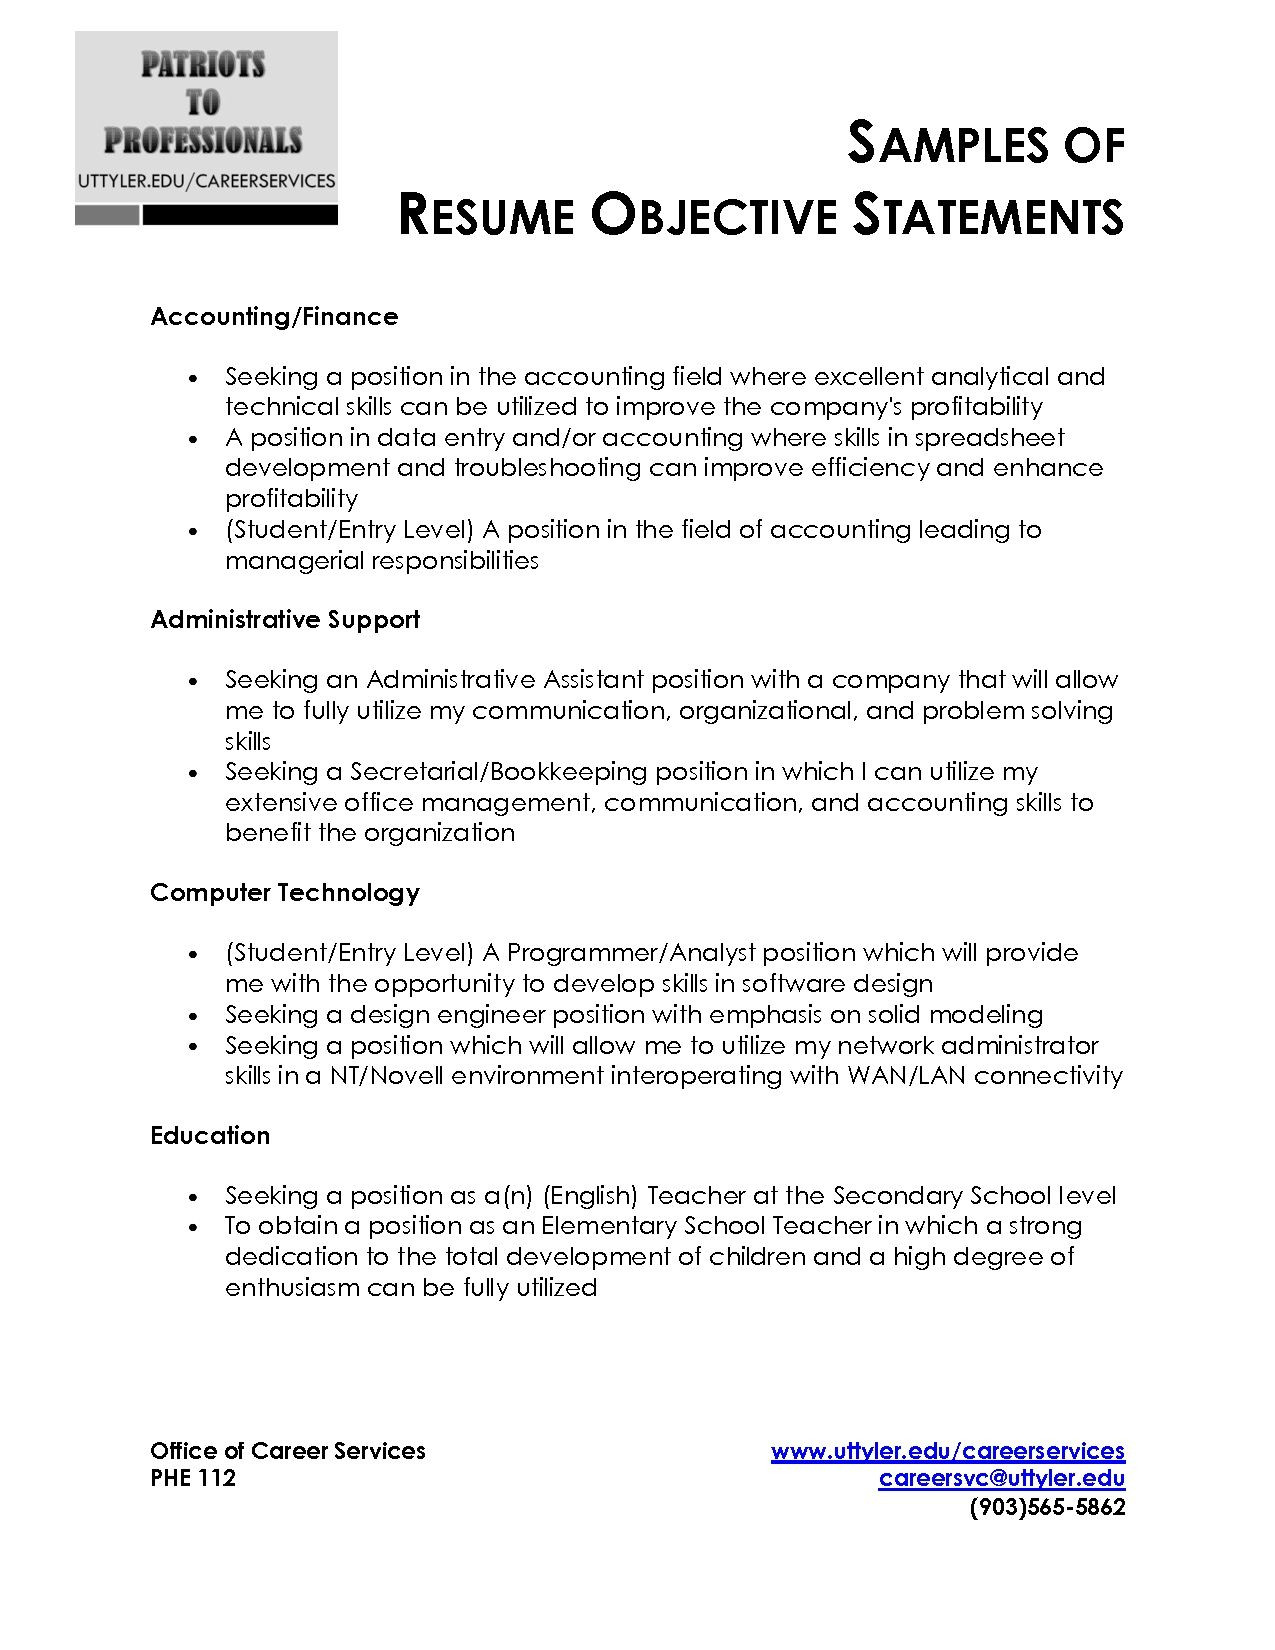 Sample Resume Objective Statements for Internship Useful Materials for Accounting Internship Examples Resumes …